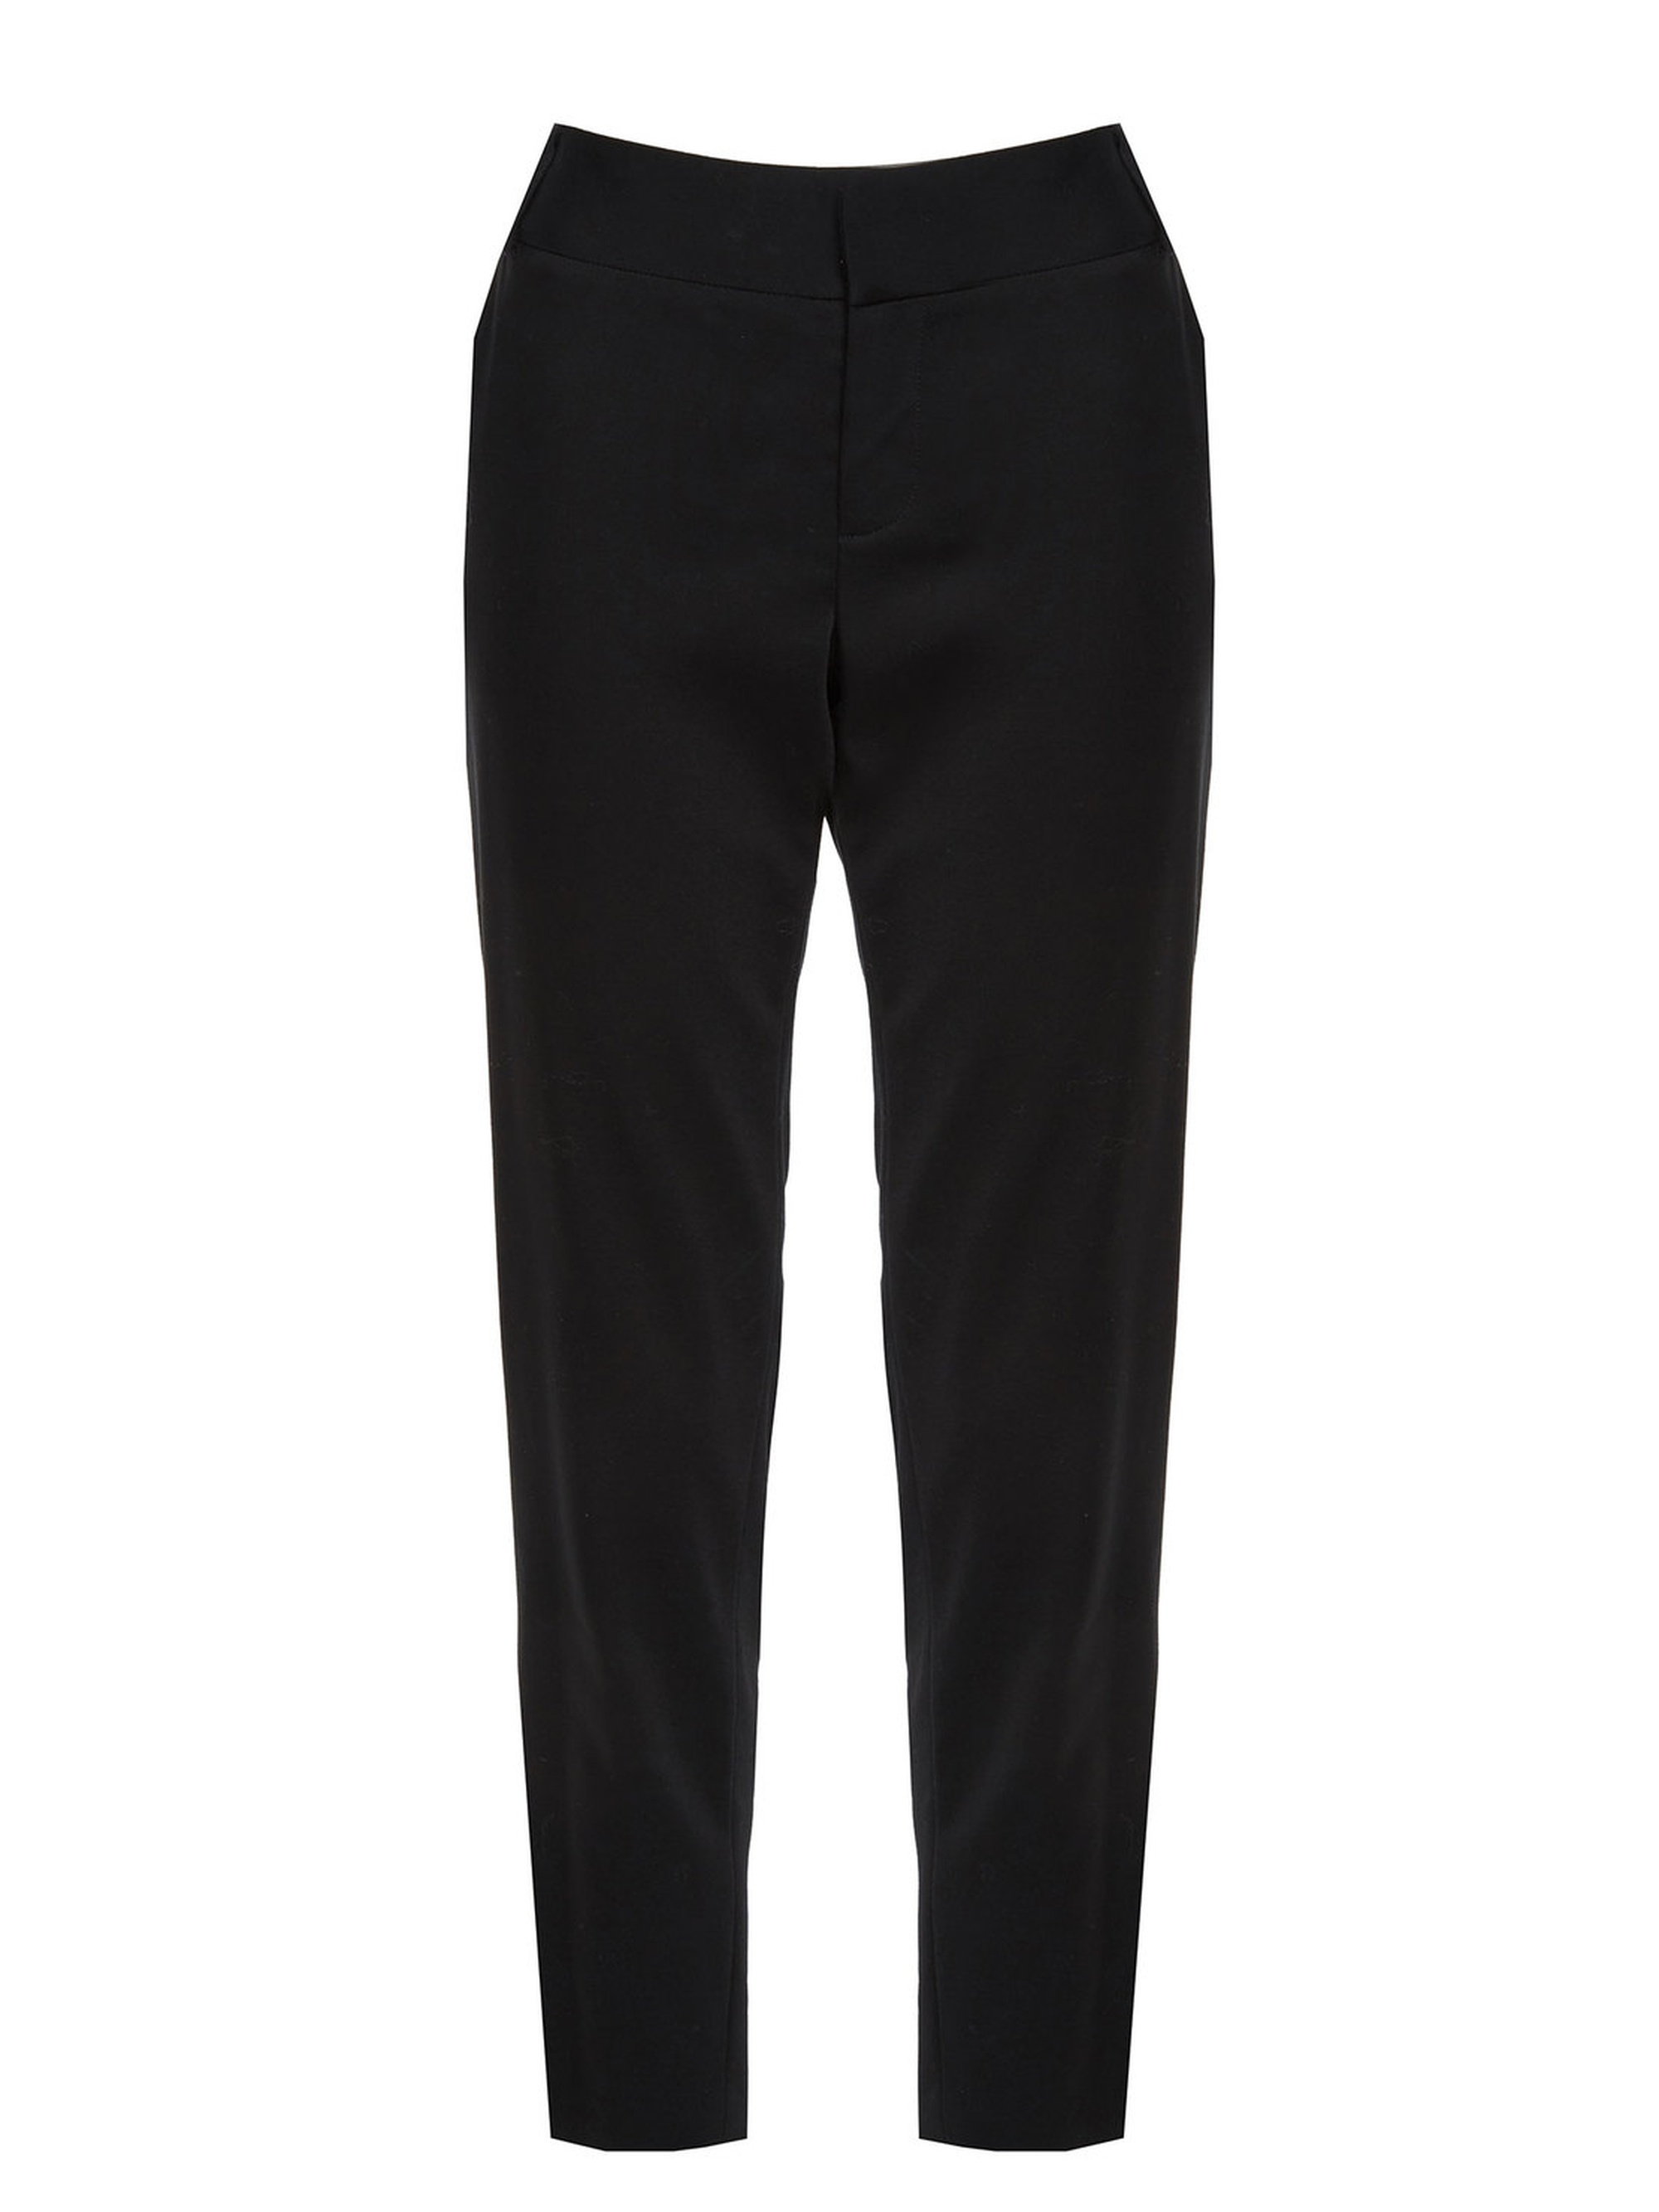 STACEY SLIM TROUSER - 1